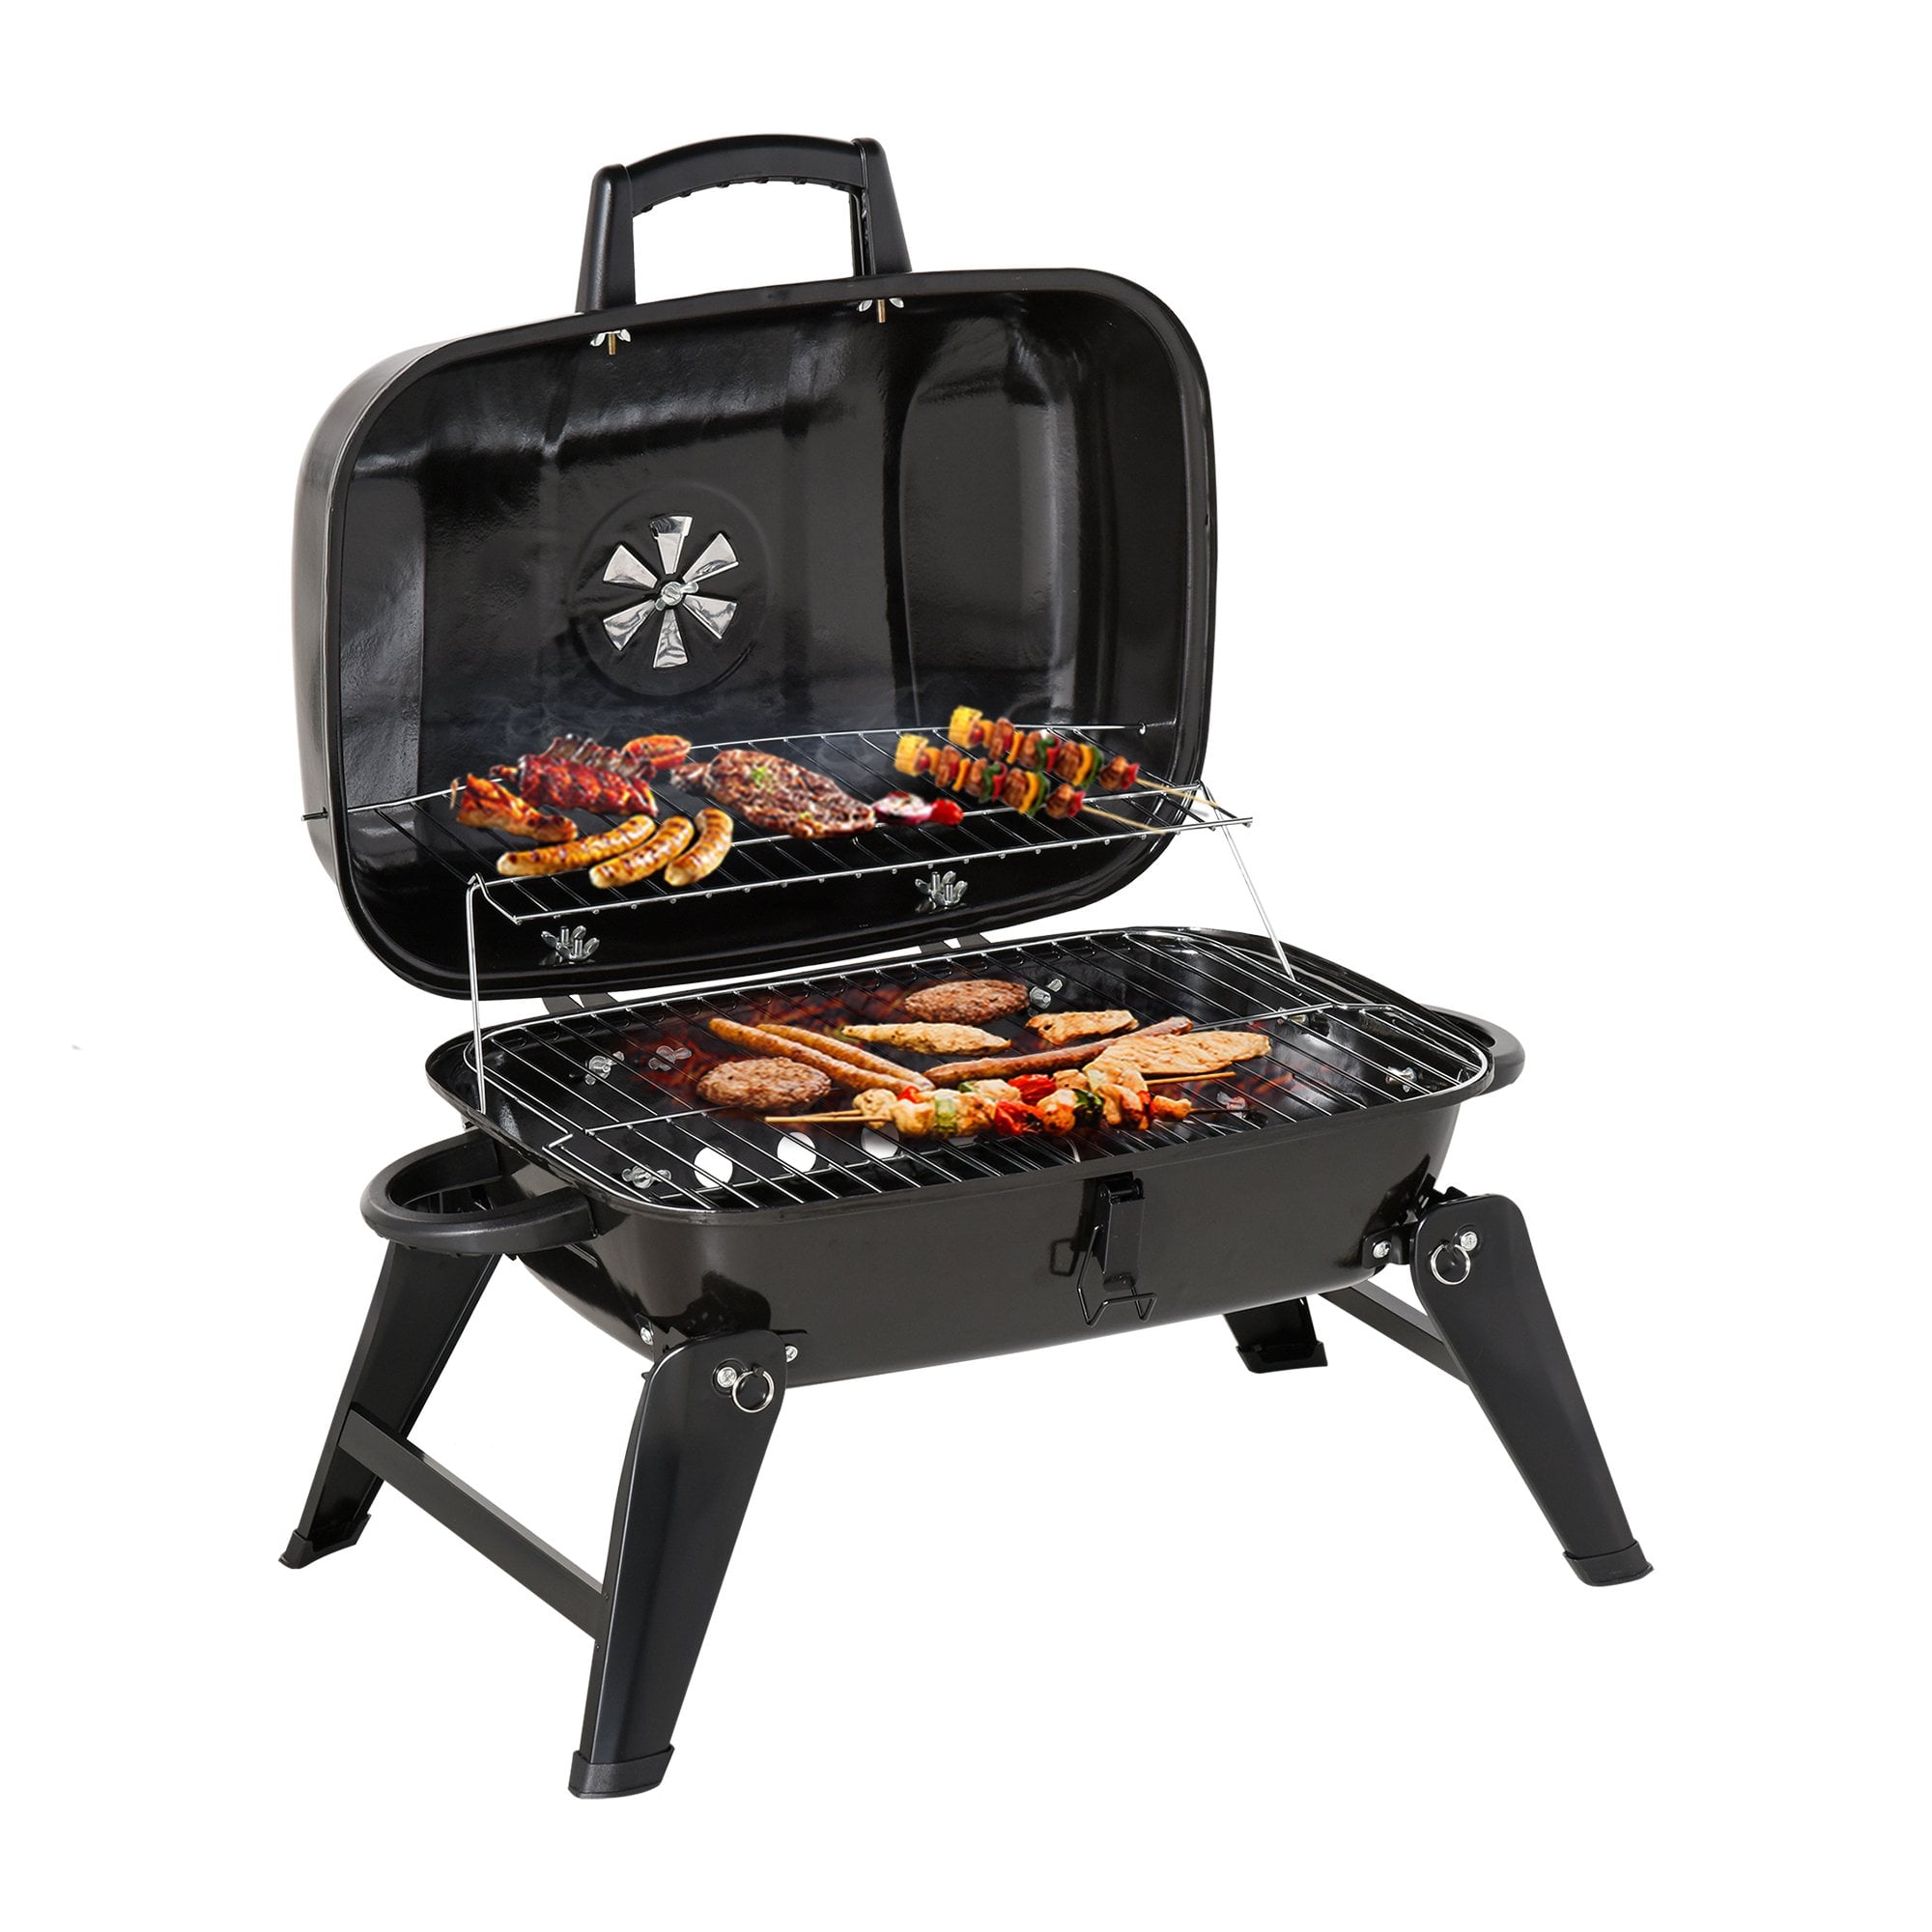 Outsunny Compact Charcoal BBQ Grill - Black